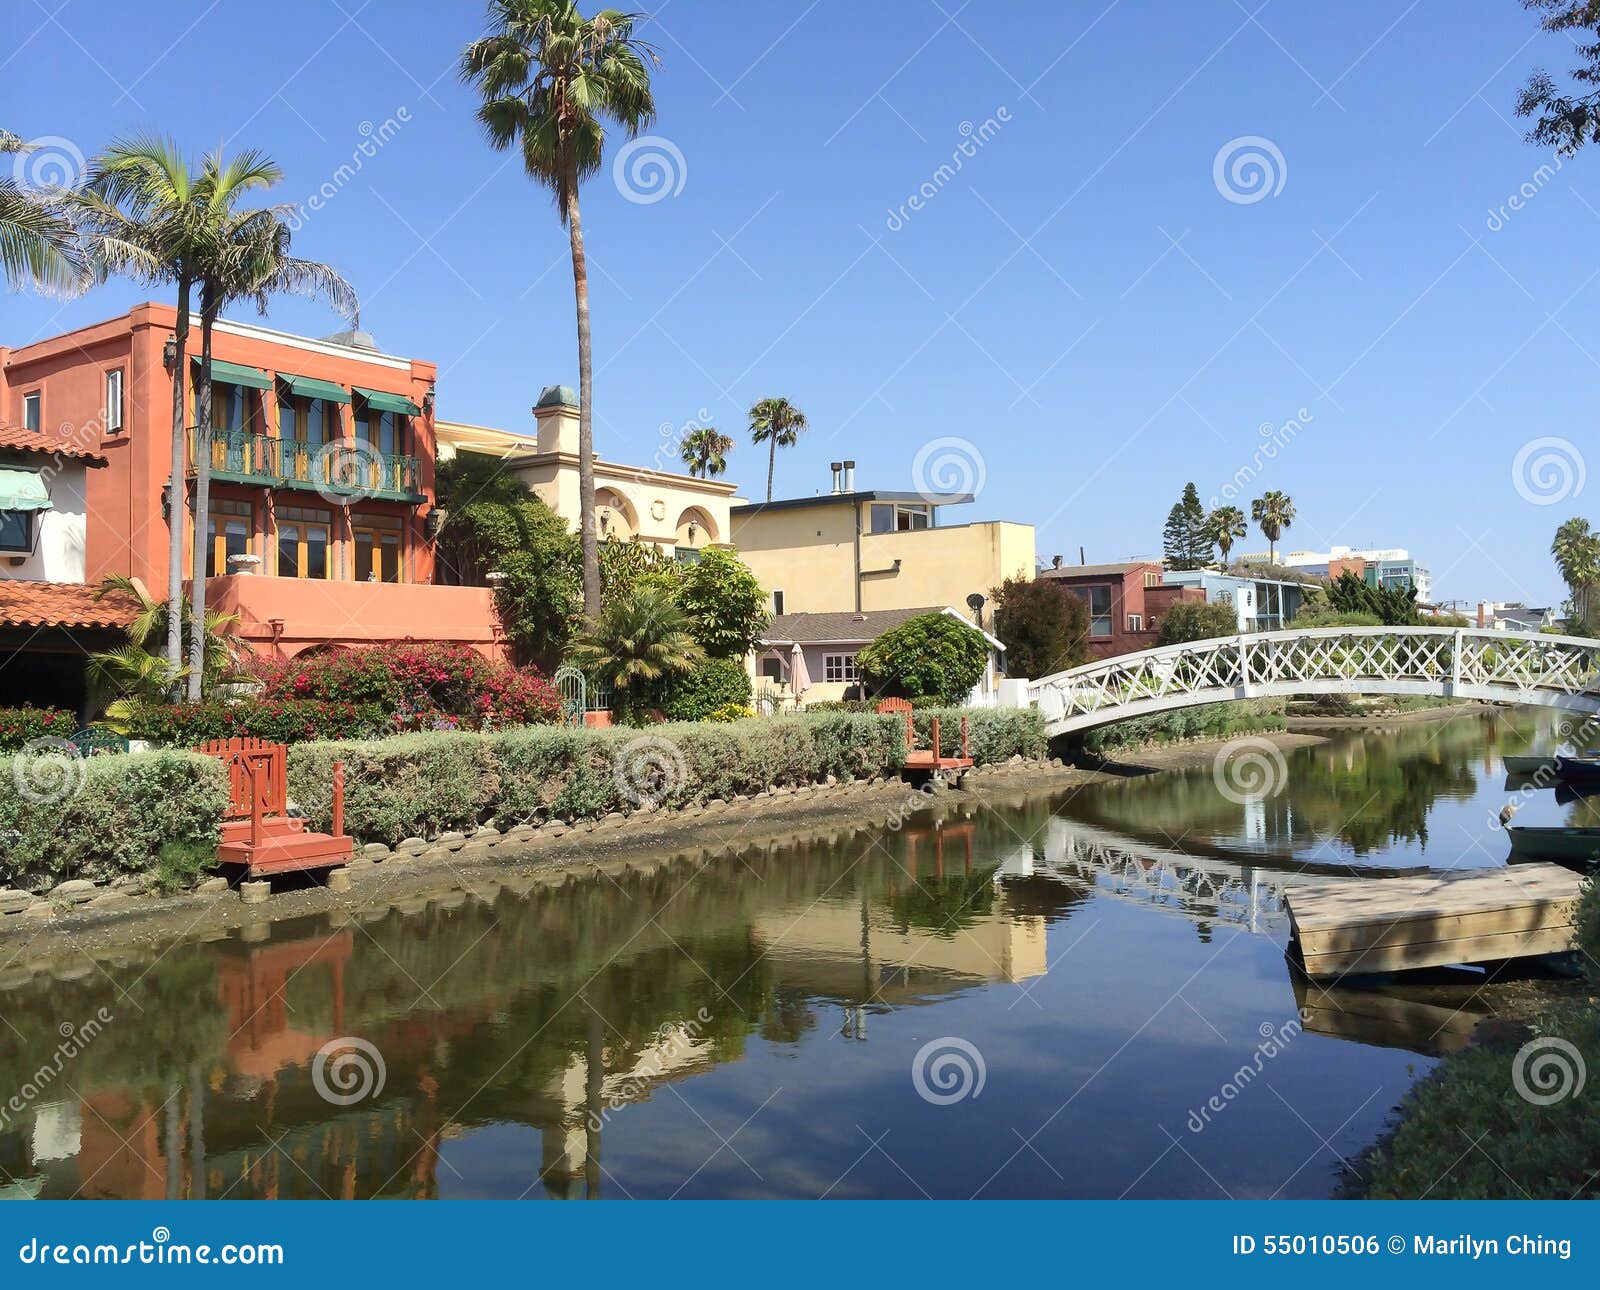 Houses And Bridge At Venice Canal Historic District Stock ...